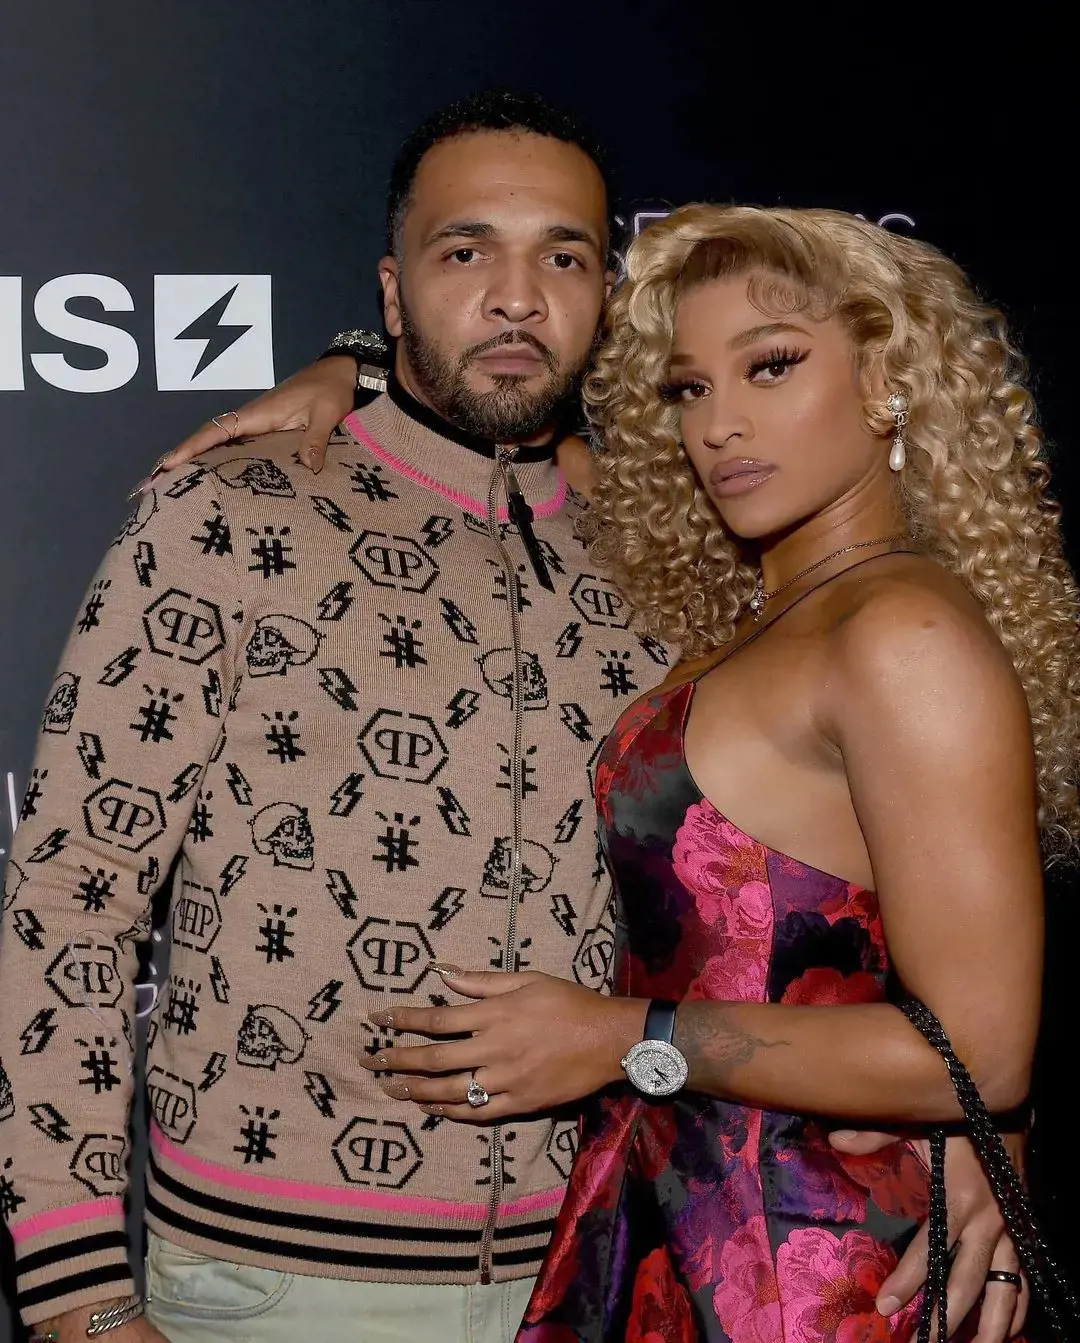 Joseline and her husband Balistic Beats attended the Zeus Network event and promotes Joseline Carabet show